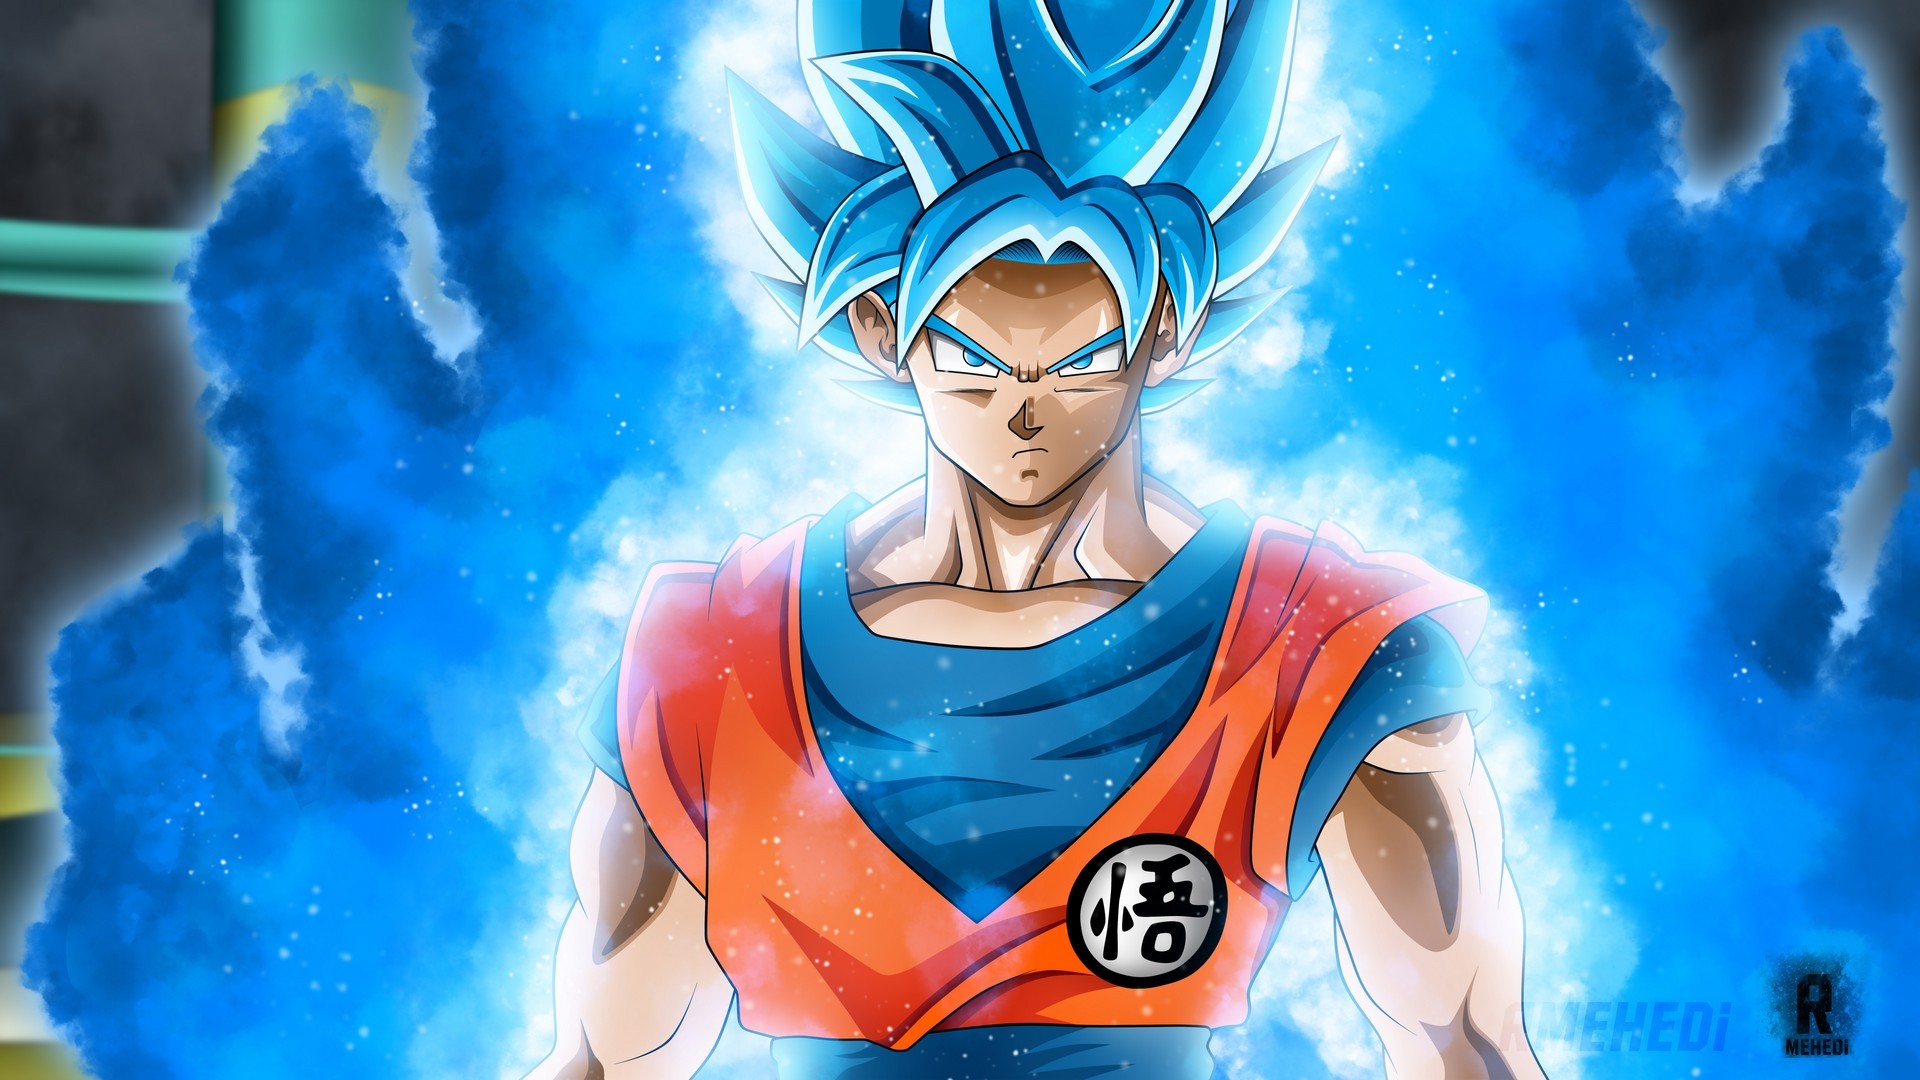 Goku SSJ Blue HD Backgrounds With Resolution 1920X1080 pixel. You can make this wallpaper for your Desktop Computer Backgrounds, Mac Wallpapers, Android Lock screen or iPhone Screensavers